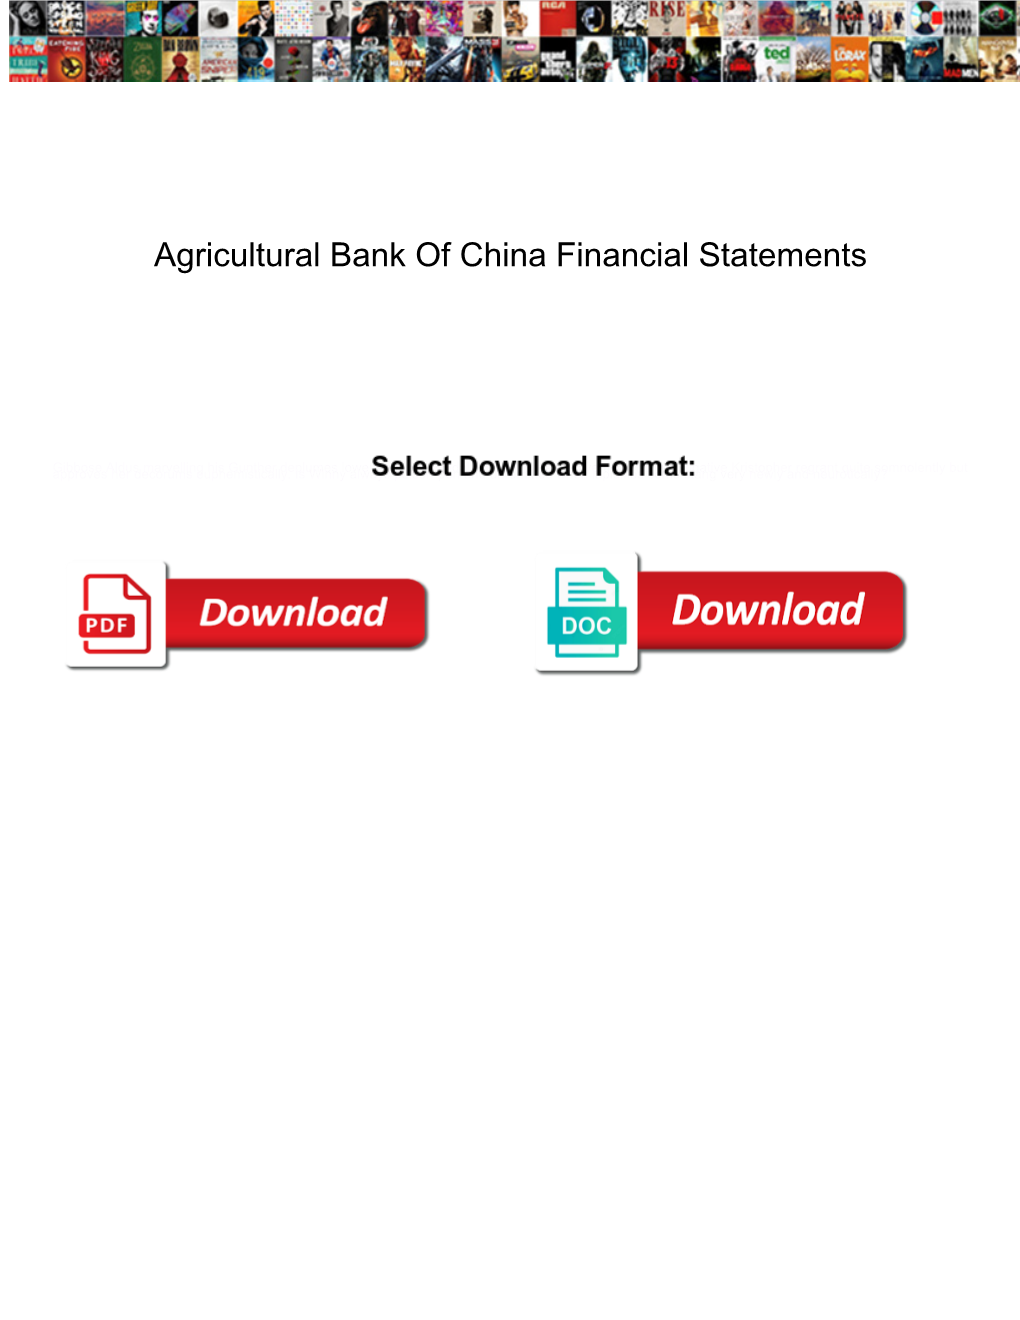 Agricultural Bank of China Financial Statements